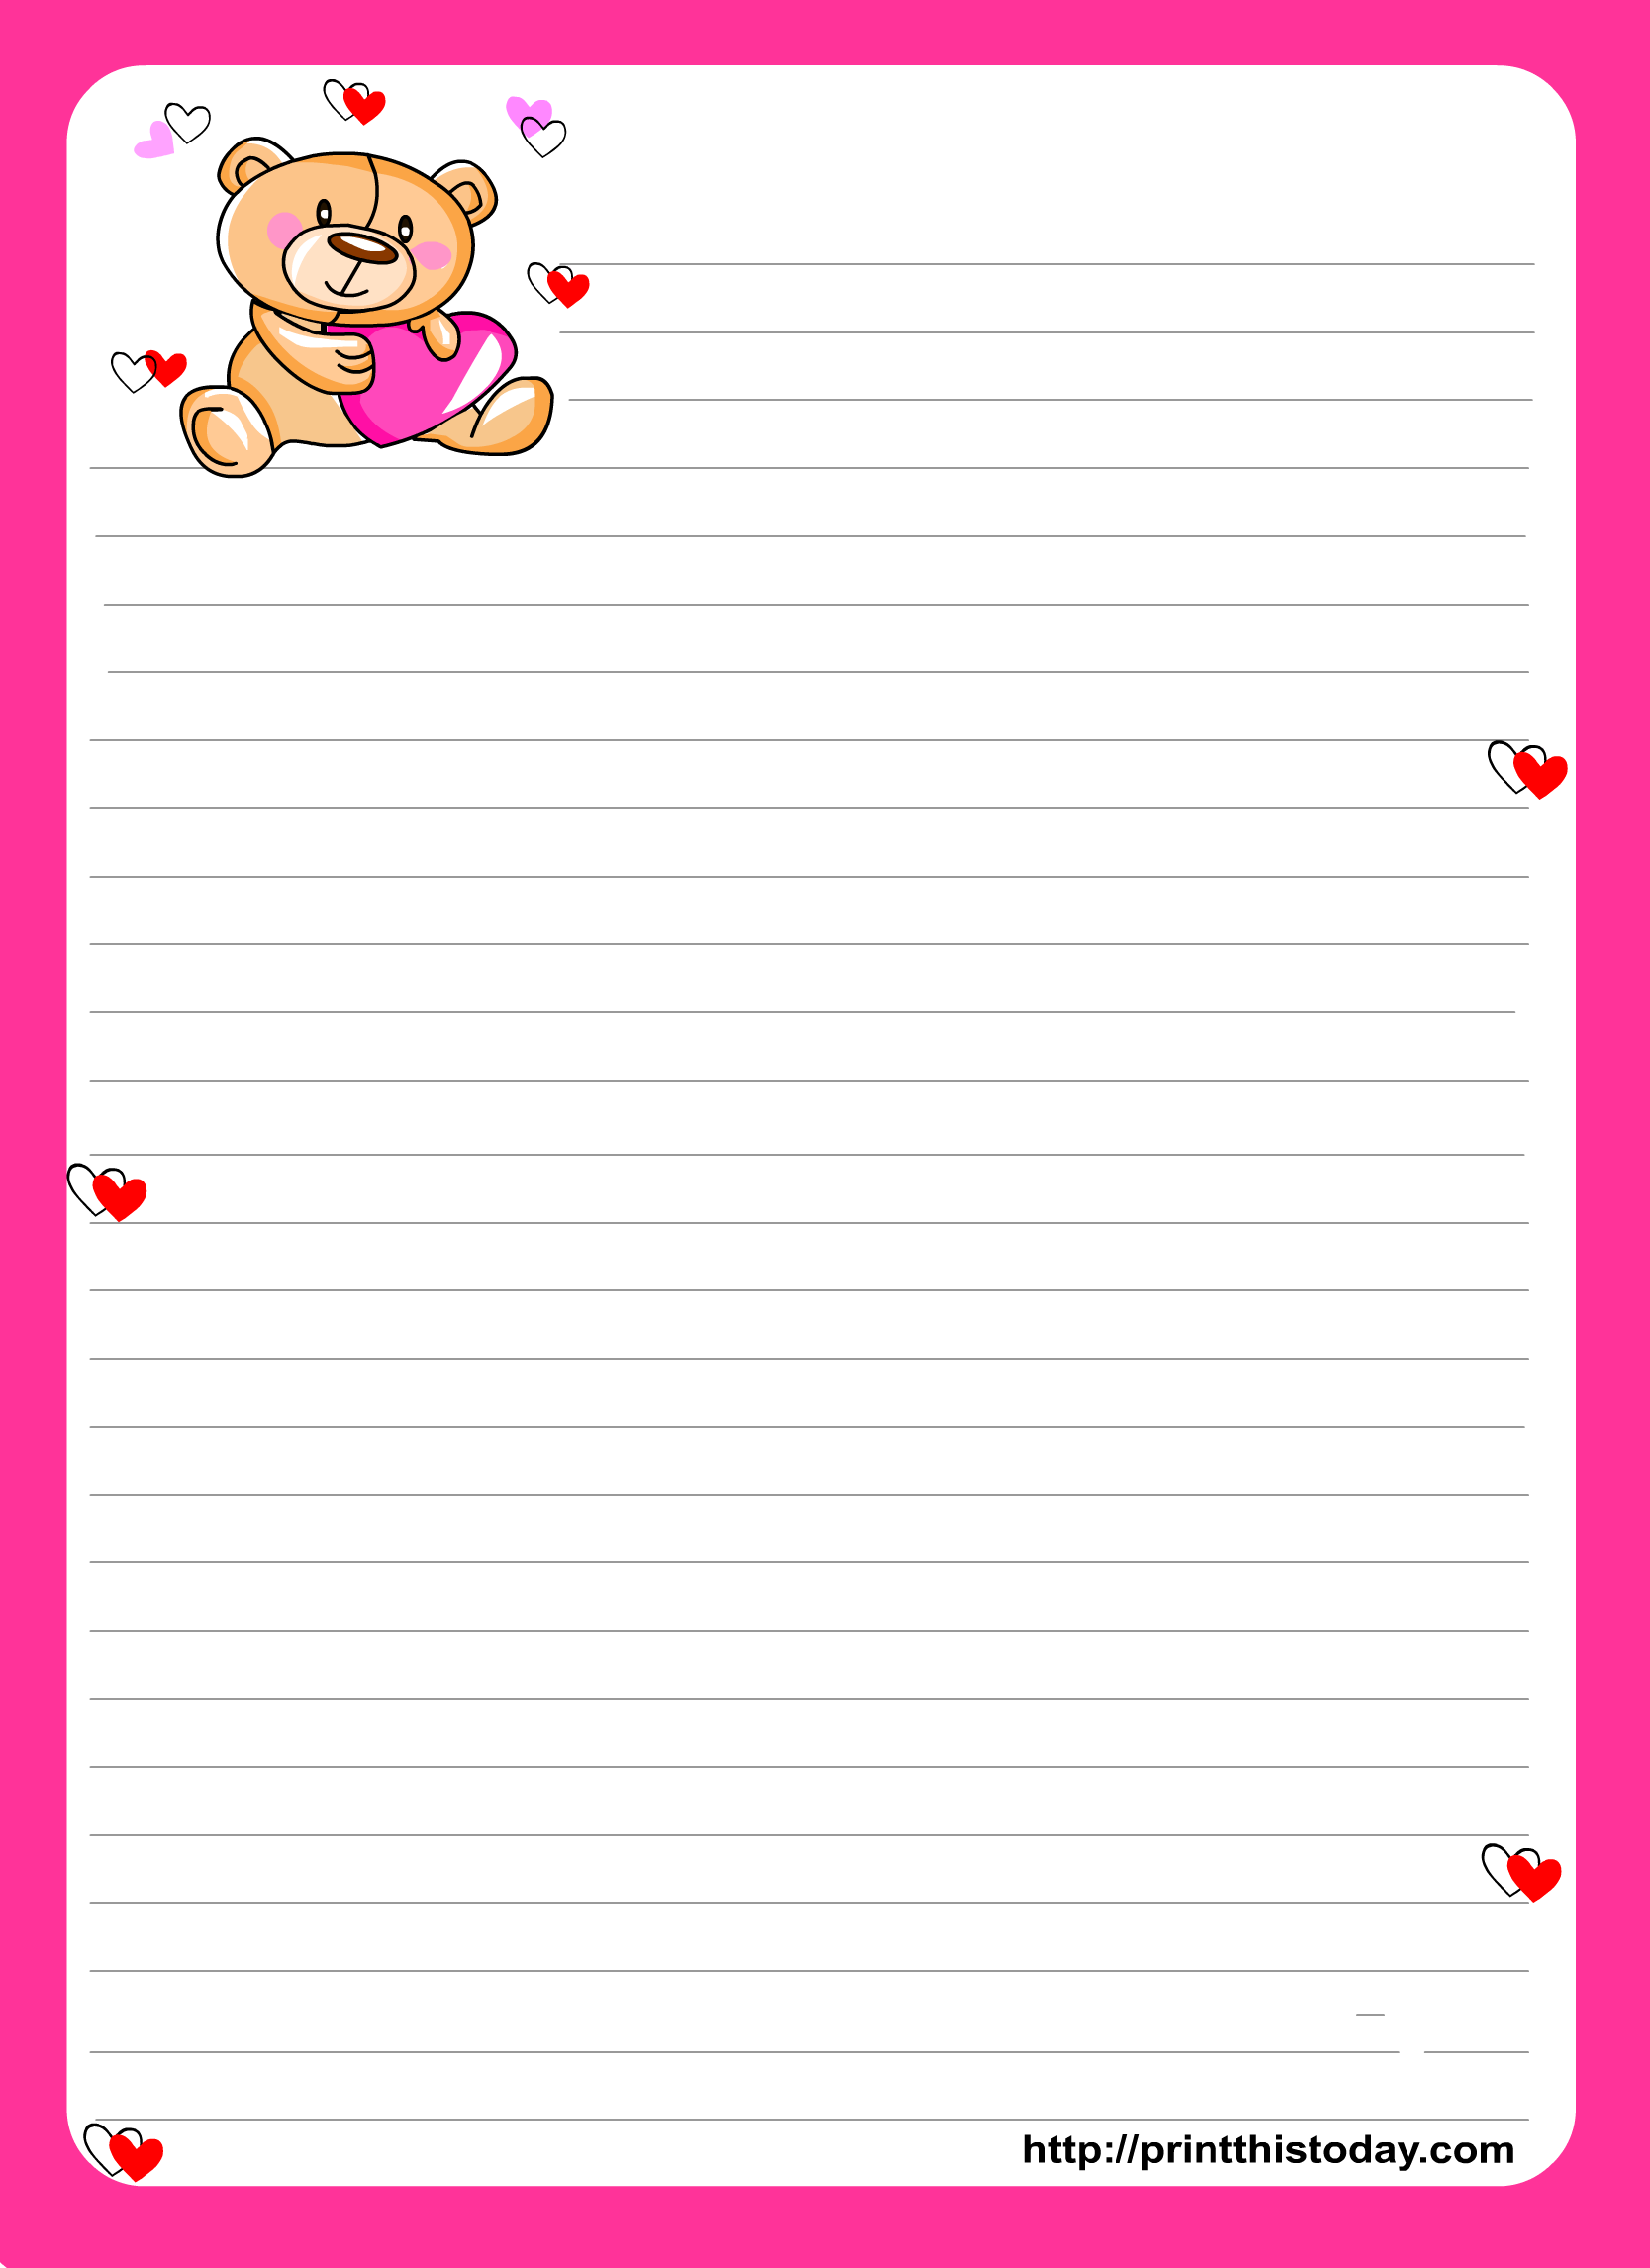 7-best-images-of-printable-lined-paper-with-design-free-printable